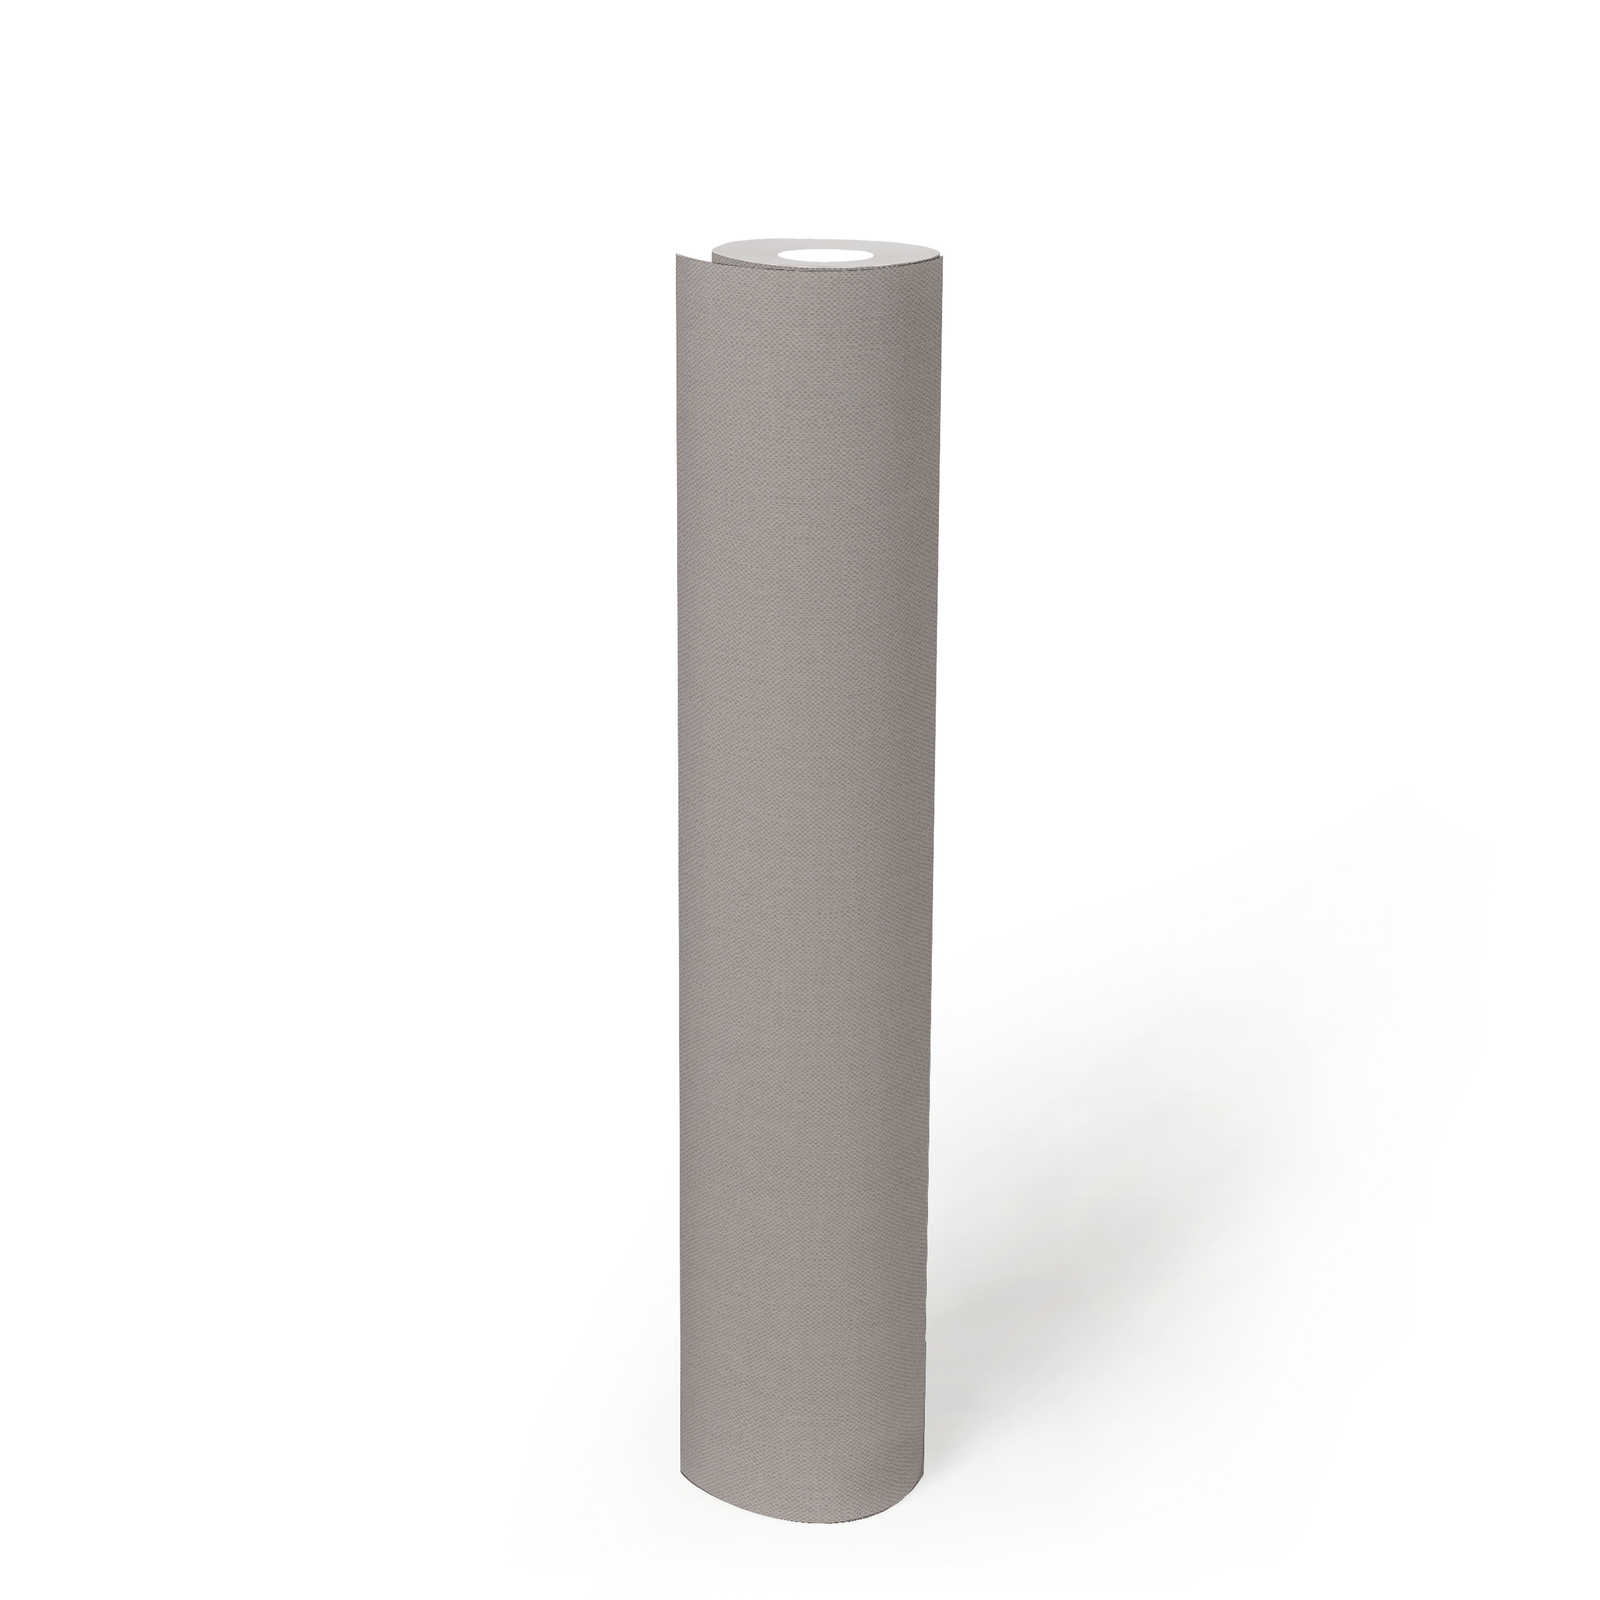             wallpaper taupe plain grey beige with textile look - grey, brown
        